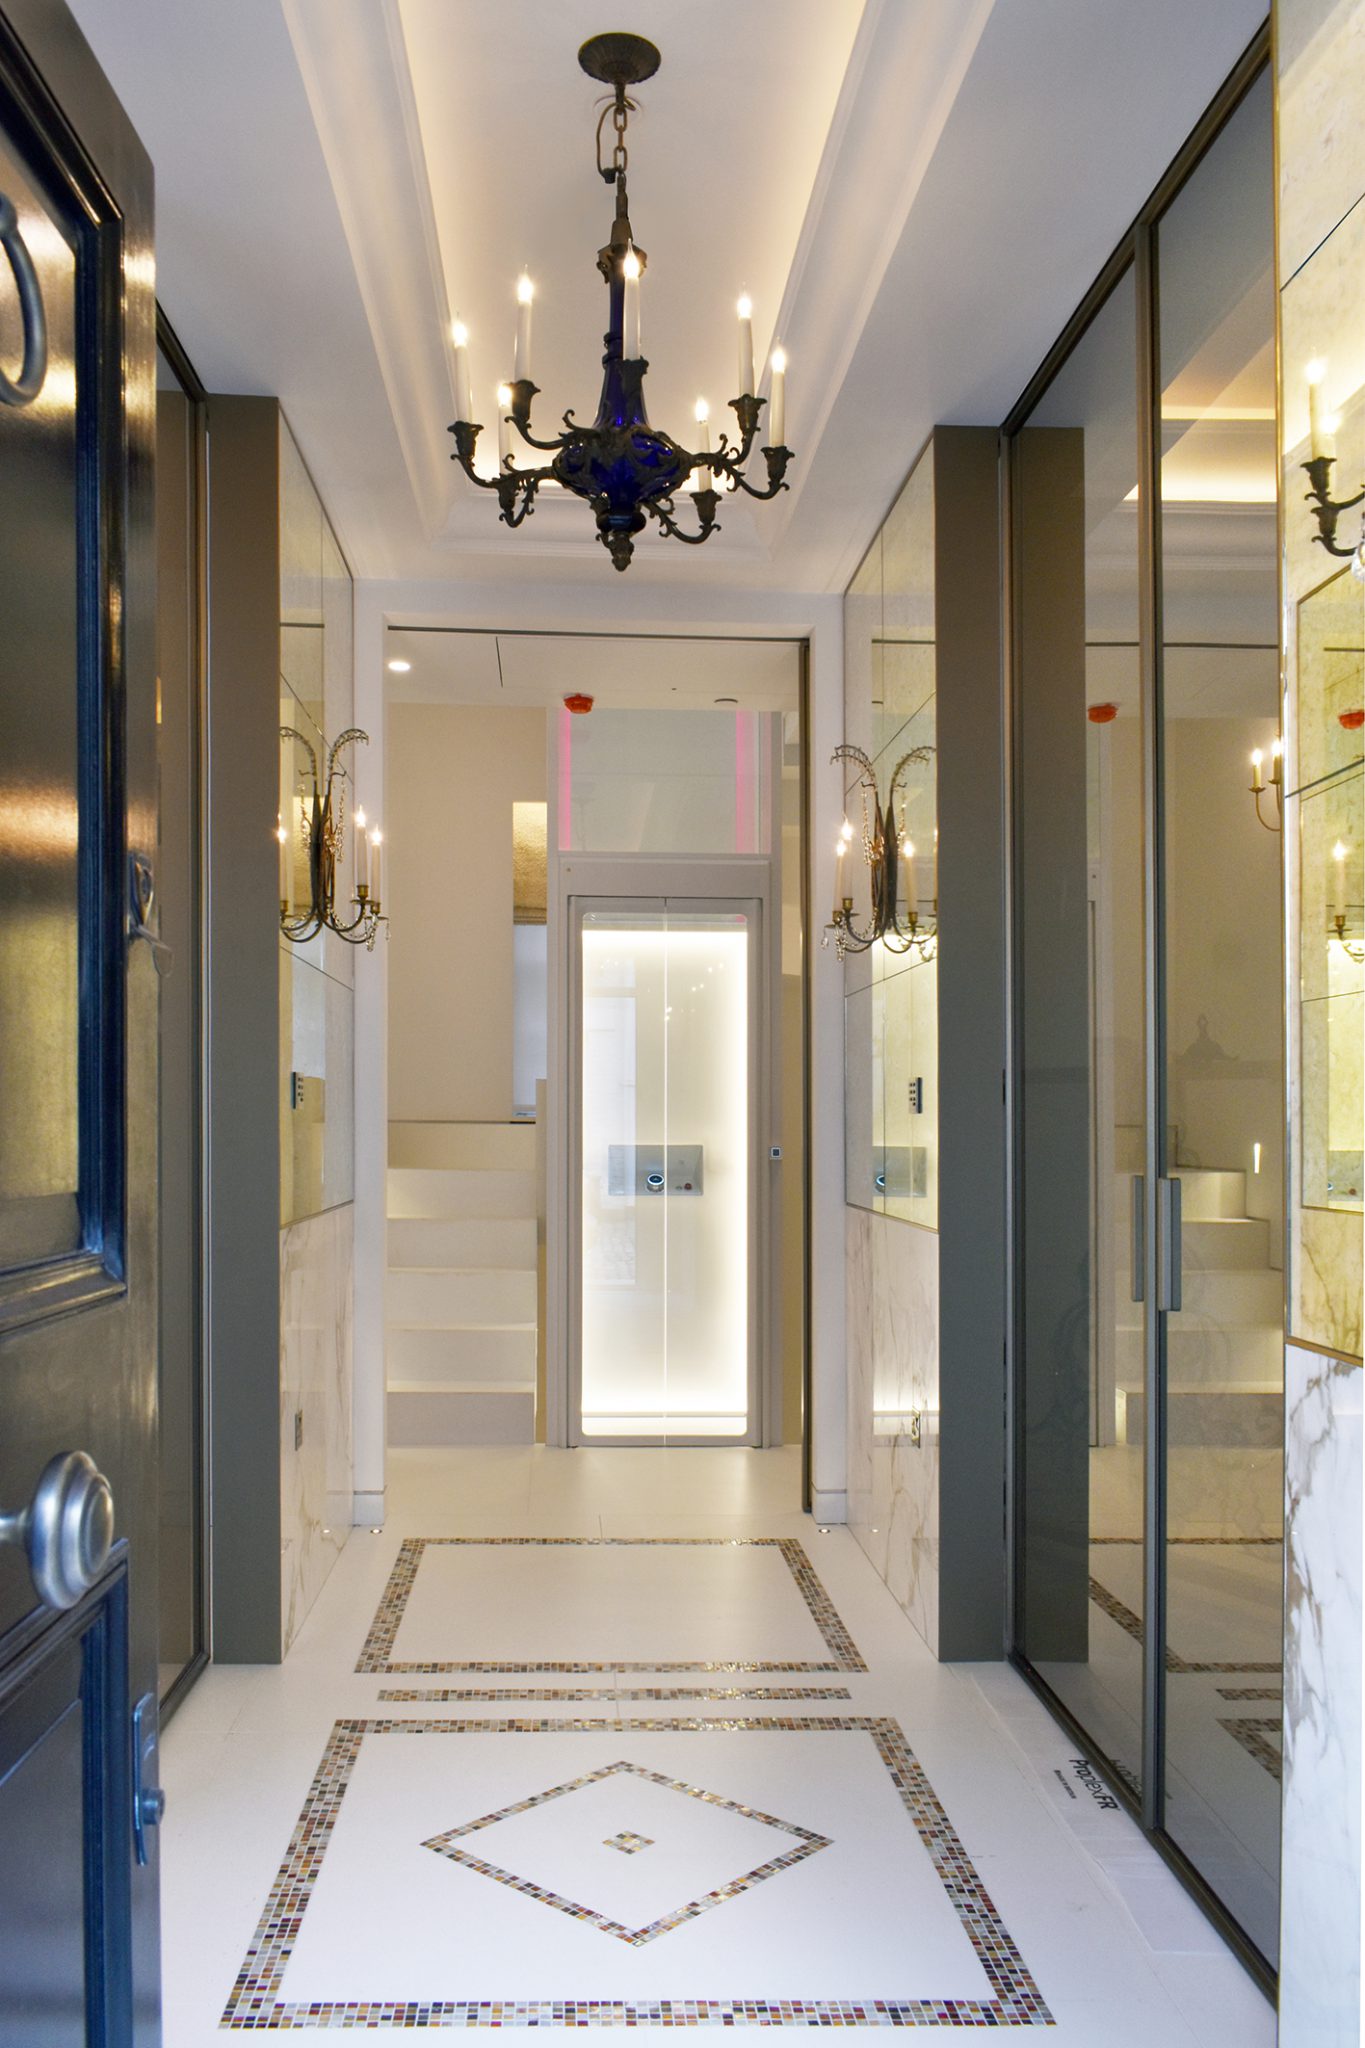 A home lift from Aritco in a luxury home